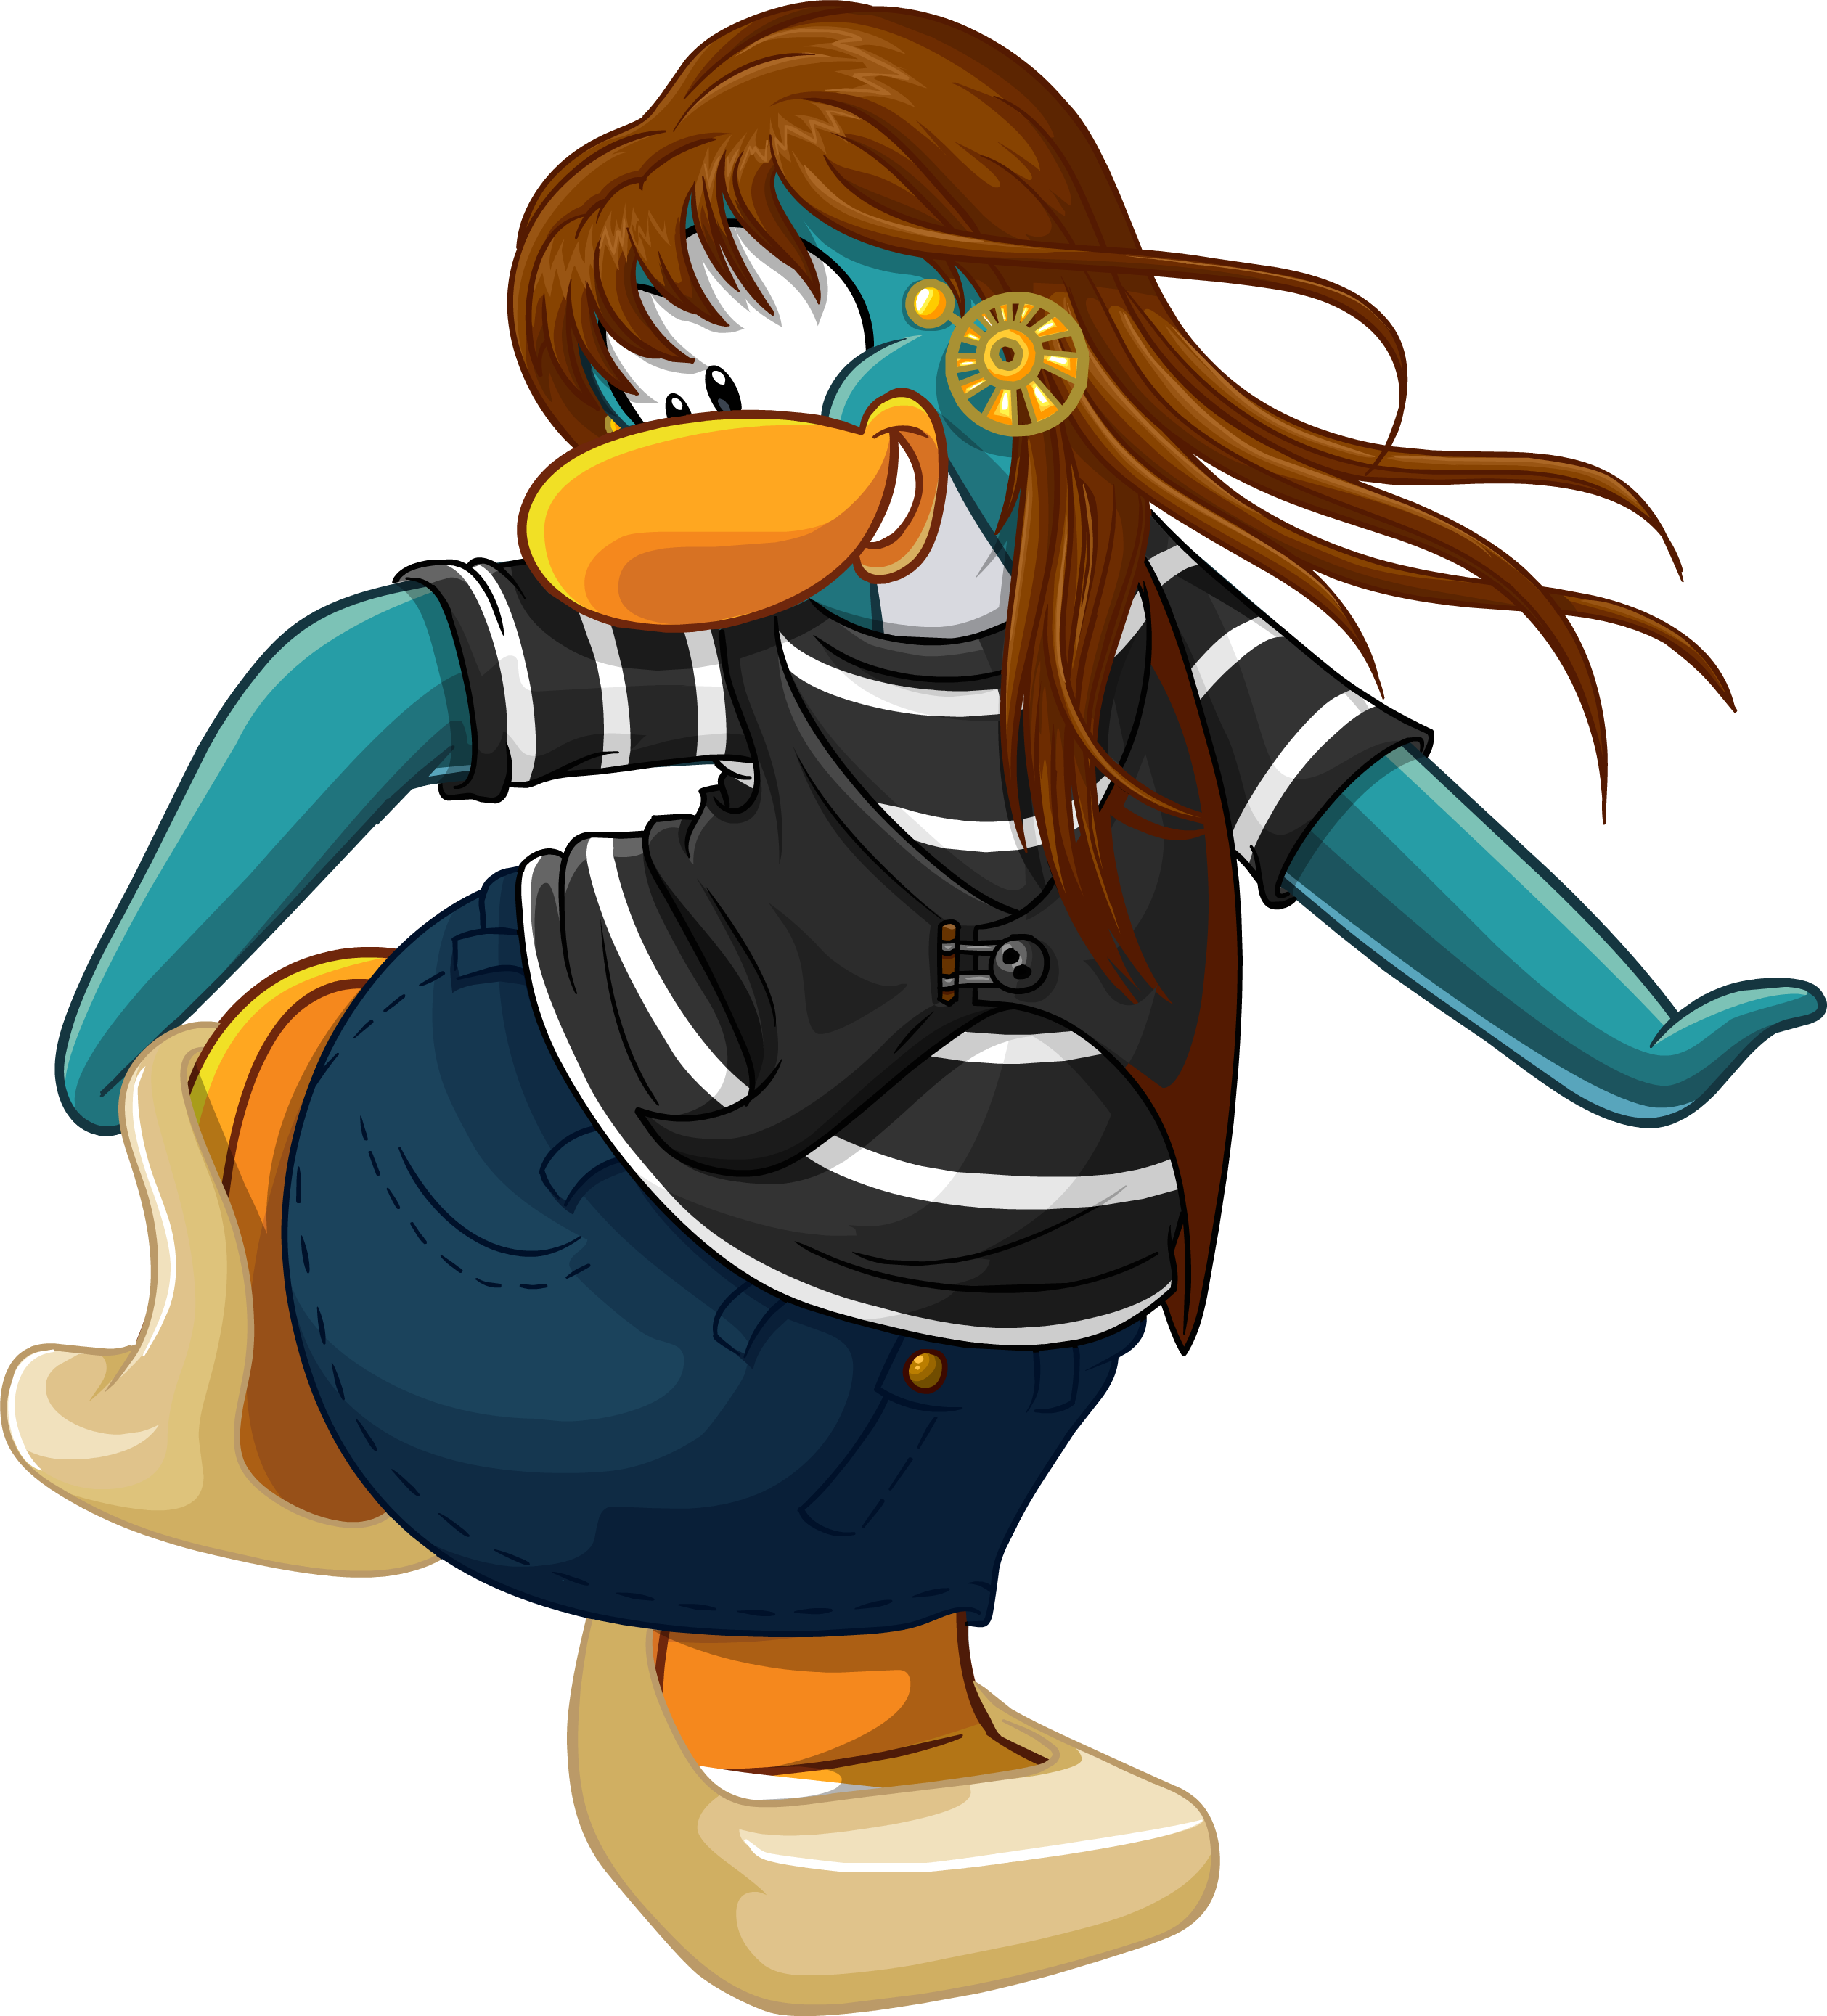 Download Penguin 1 - Club Penguin Penguin Girl PNG Image with No Background  